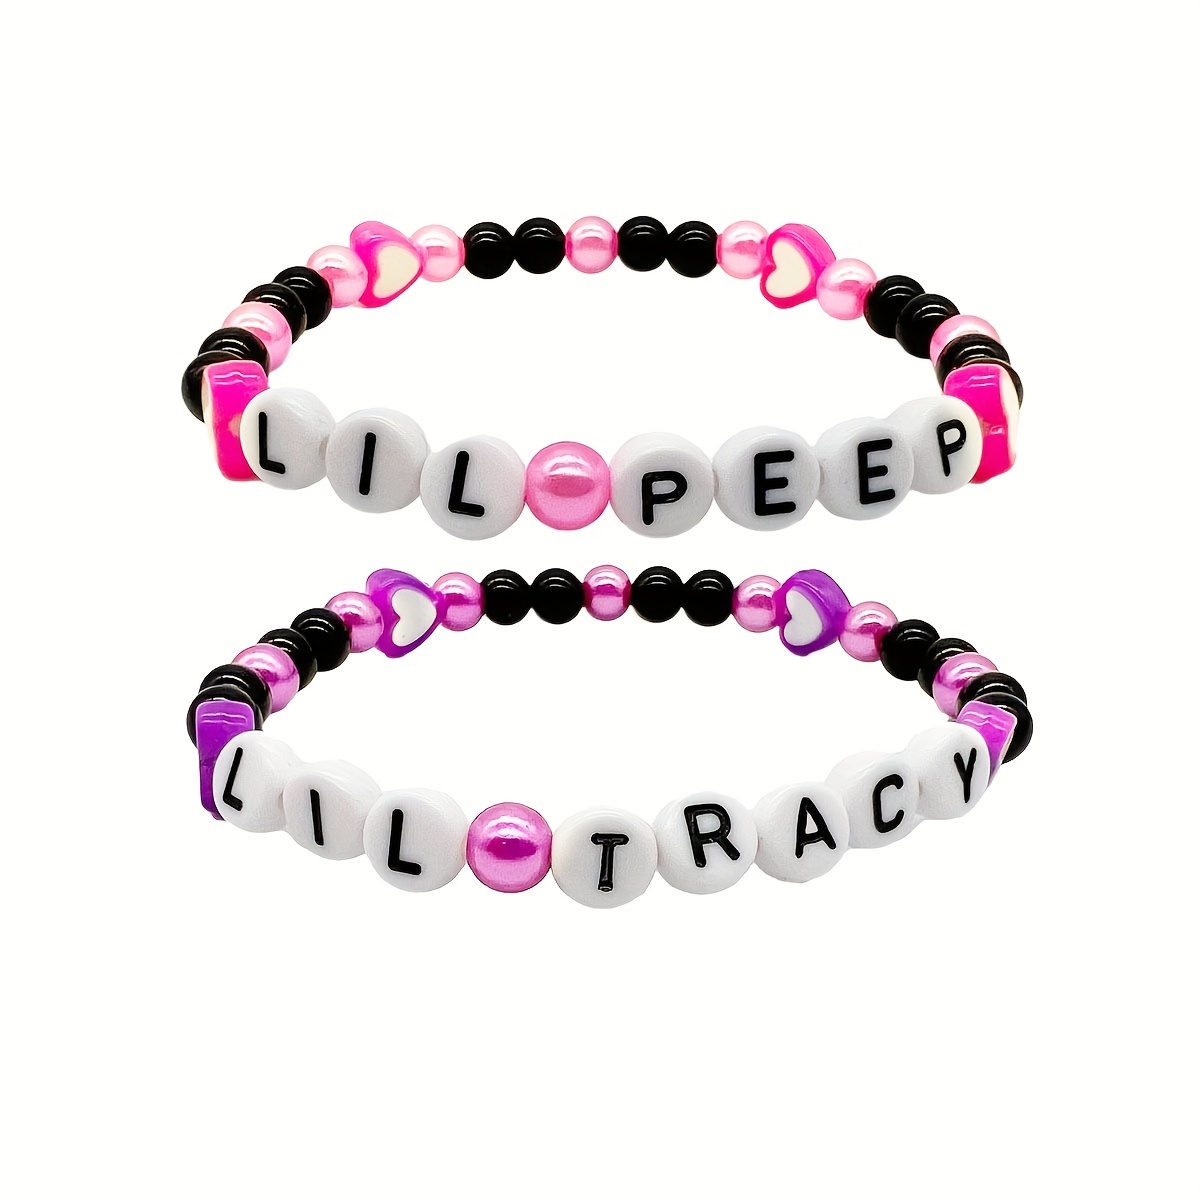 

Lil Peep & Lil Beaded Bracelets: Festive Party Accessory For Music Lovers - Soft Tone Beads, Heart Motif, Suitable For Year-round Events